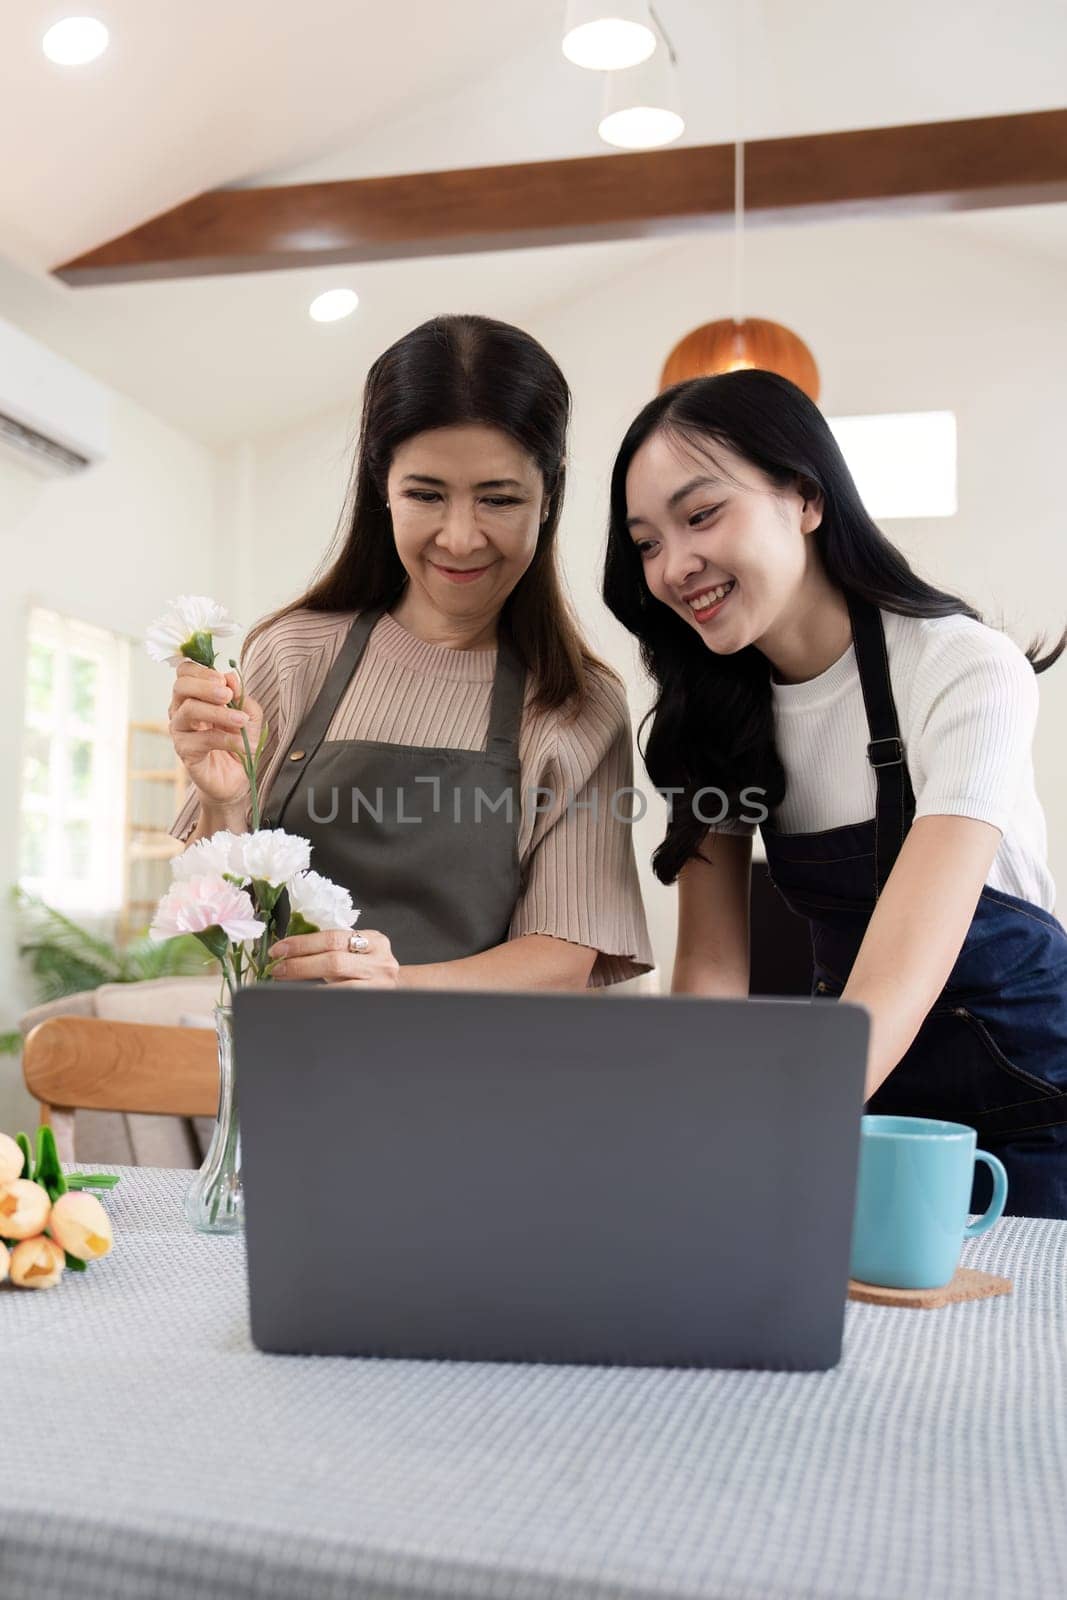 Happy mother and daughter arranging flower in vase at table in house do activities together on Mother's day by nateemee